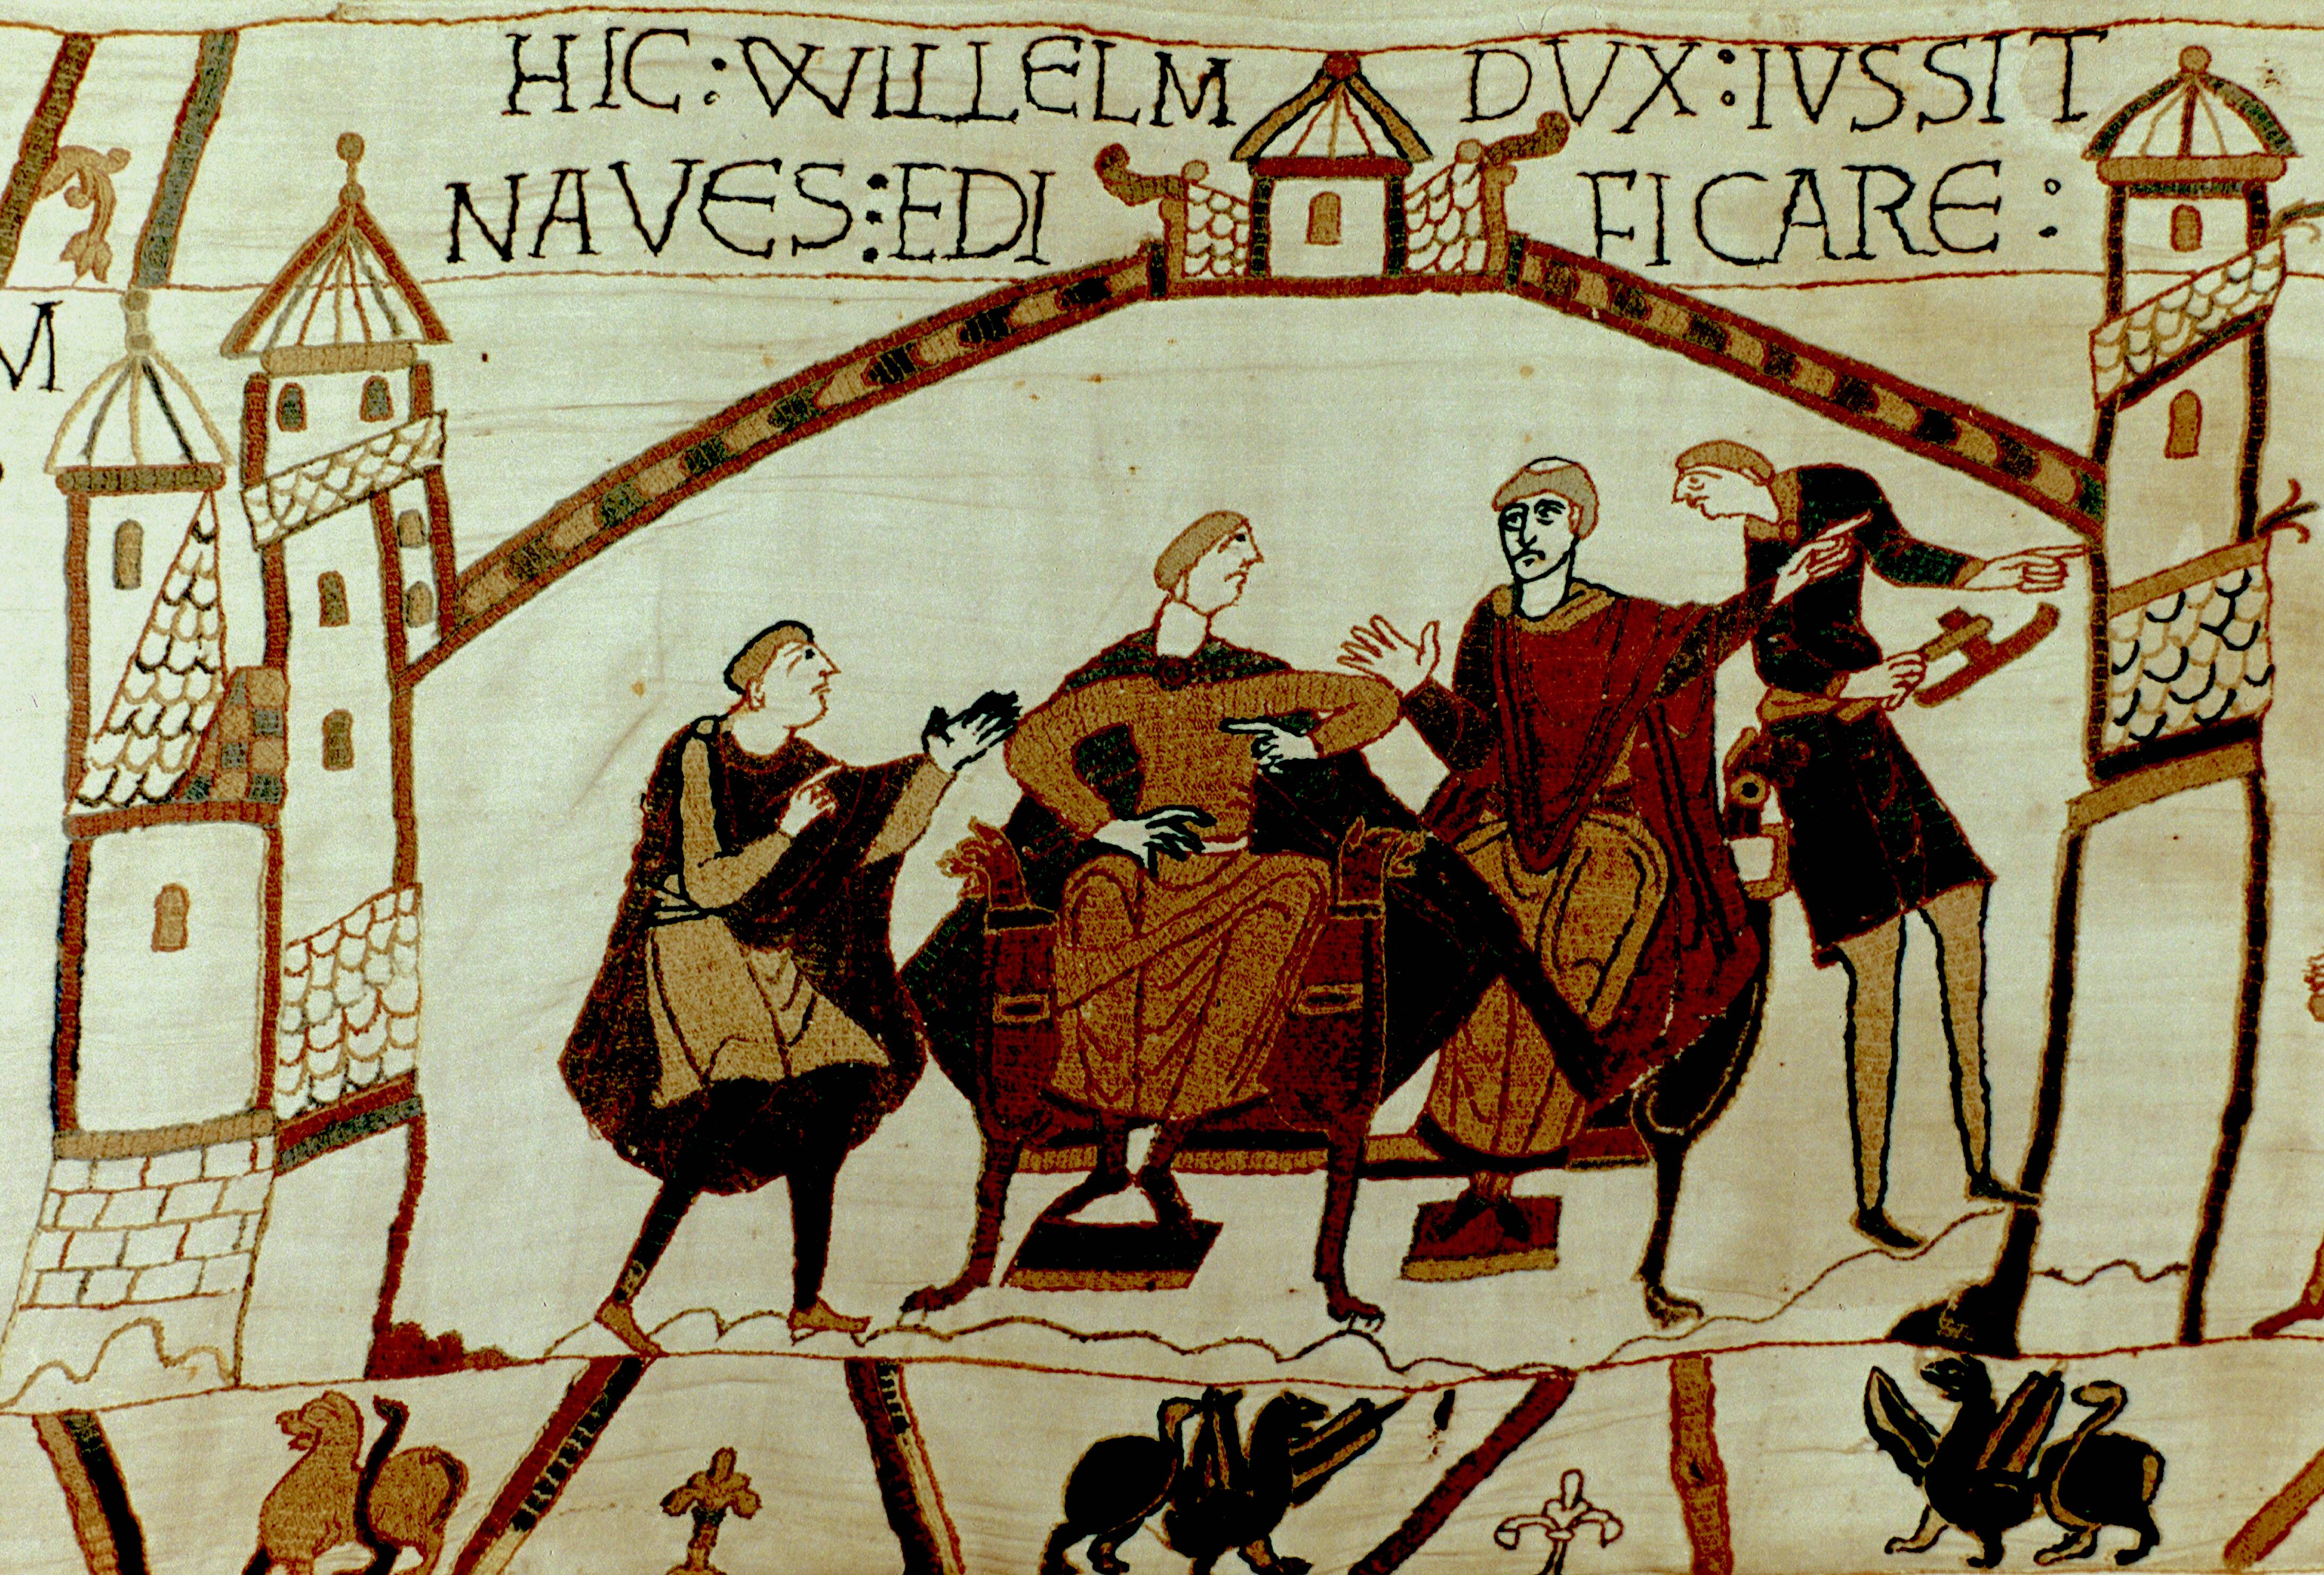 Bayeux Tapestry 1067. William of Normandy (William the Conqueror) told of the death of Edward the Confessor and the crowning of Harold II as king of England. Sitting on right is William s half-brother Bishop Odo of Bayeux. Textile NA PUBLICATIONxINxGERxSUIxAUTxONLY Copyright: xPhoto12/AnnxRonanxPicturexLibraryx ARP10A01472